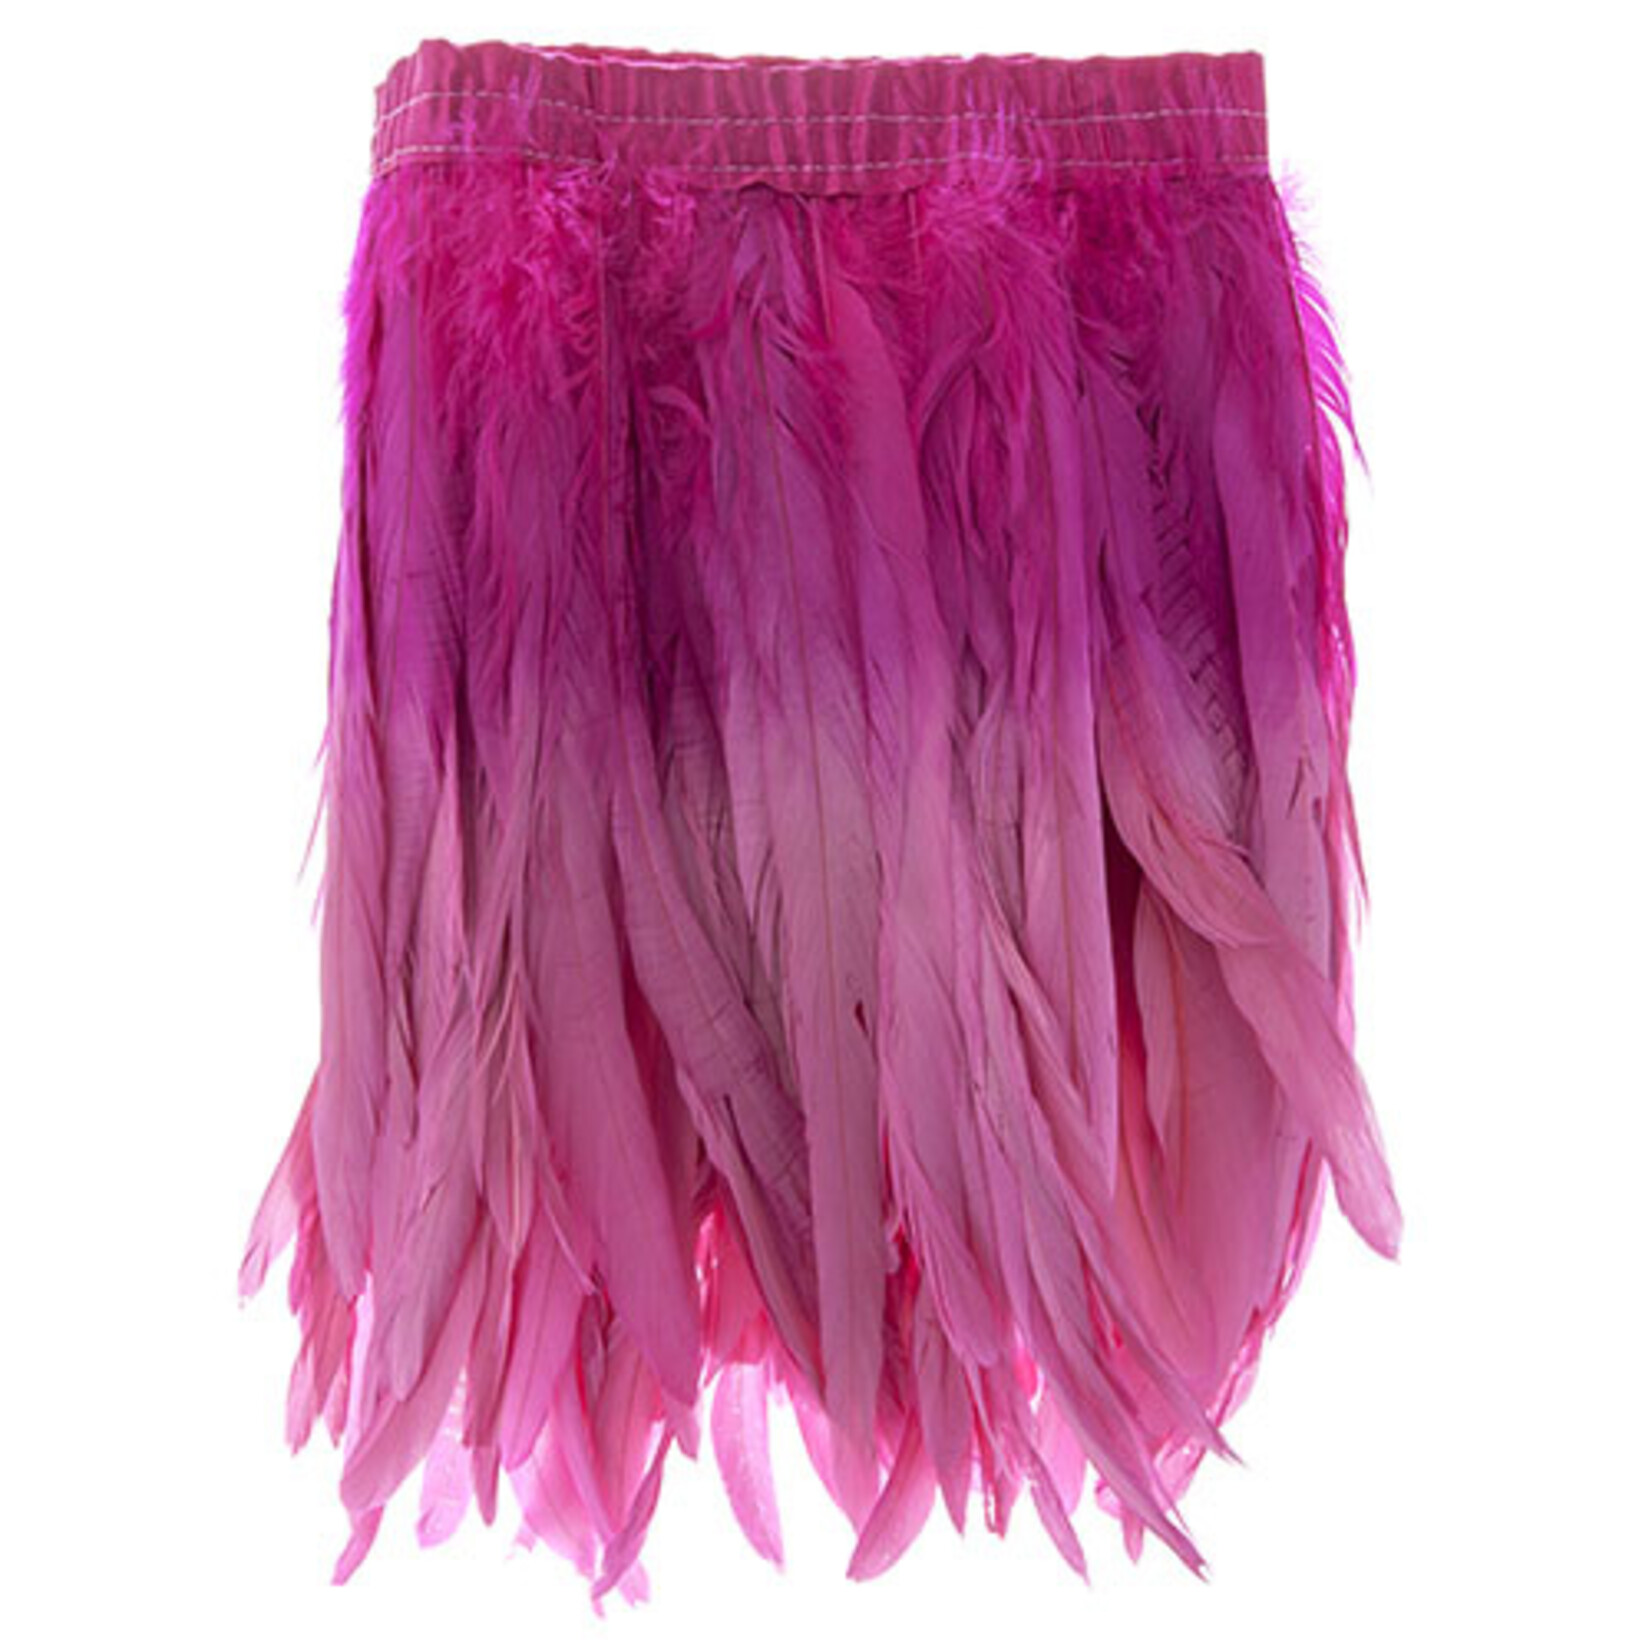 Coque Feathers Value 2 Tone 14 - 16 Inches Pretty In Pink